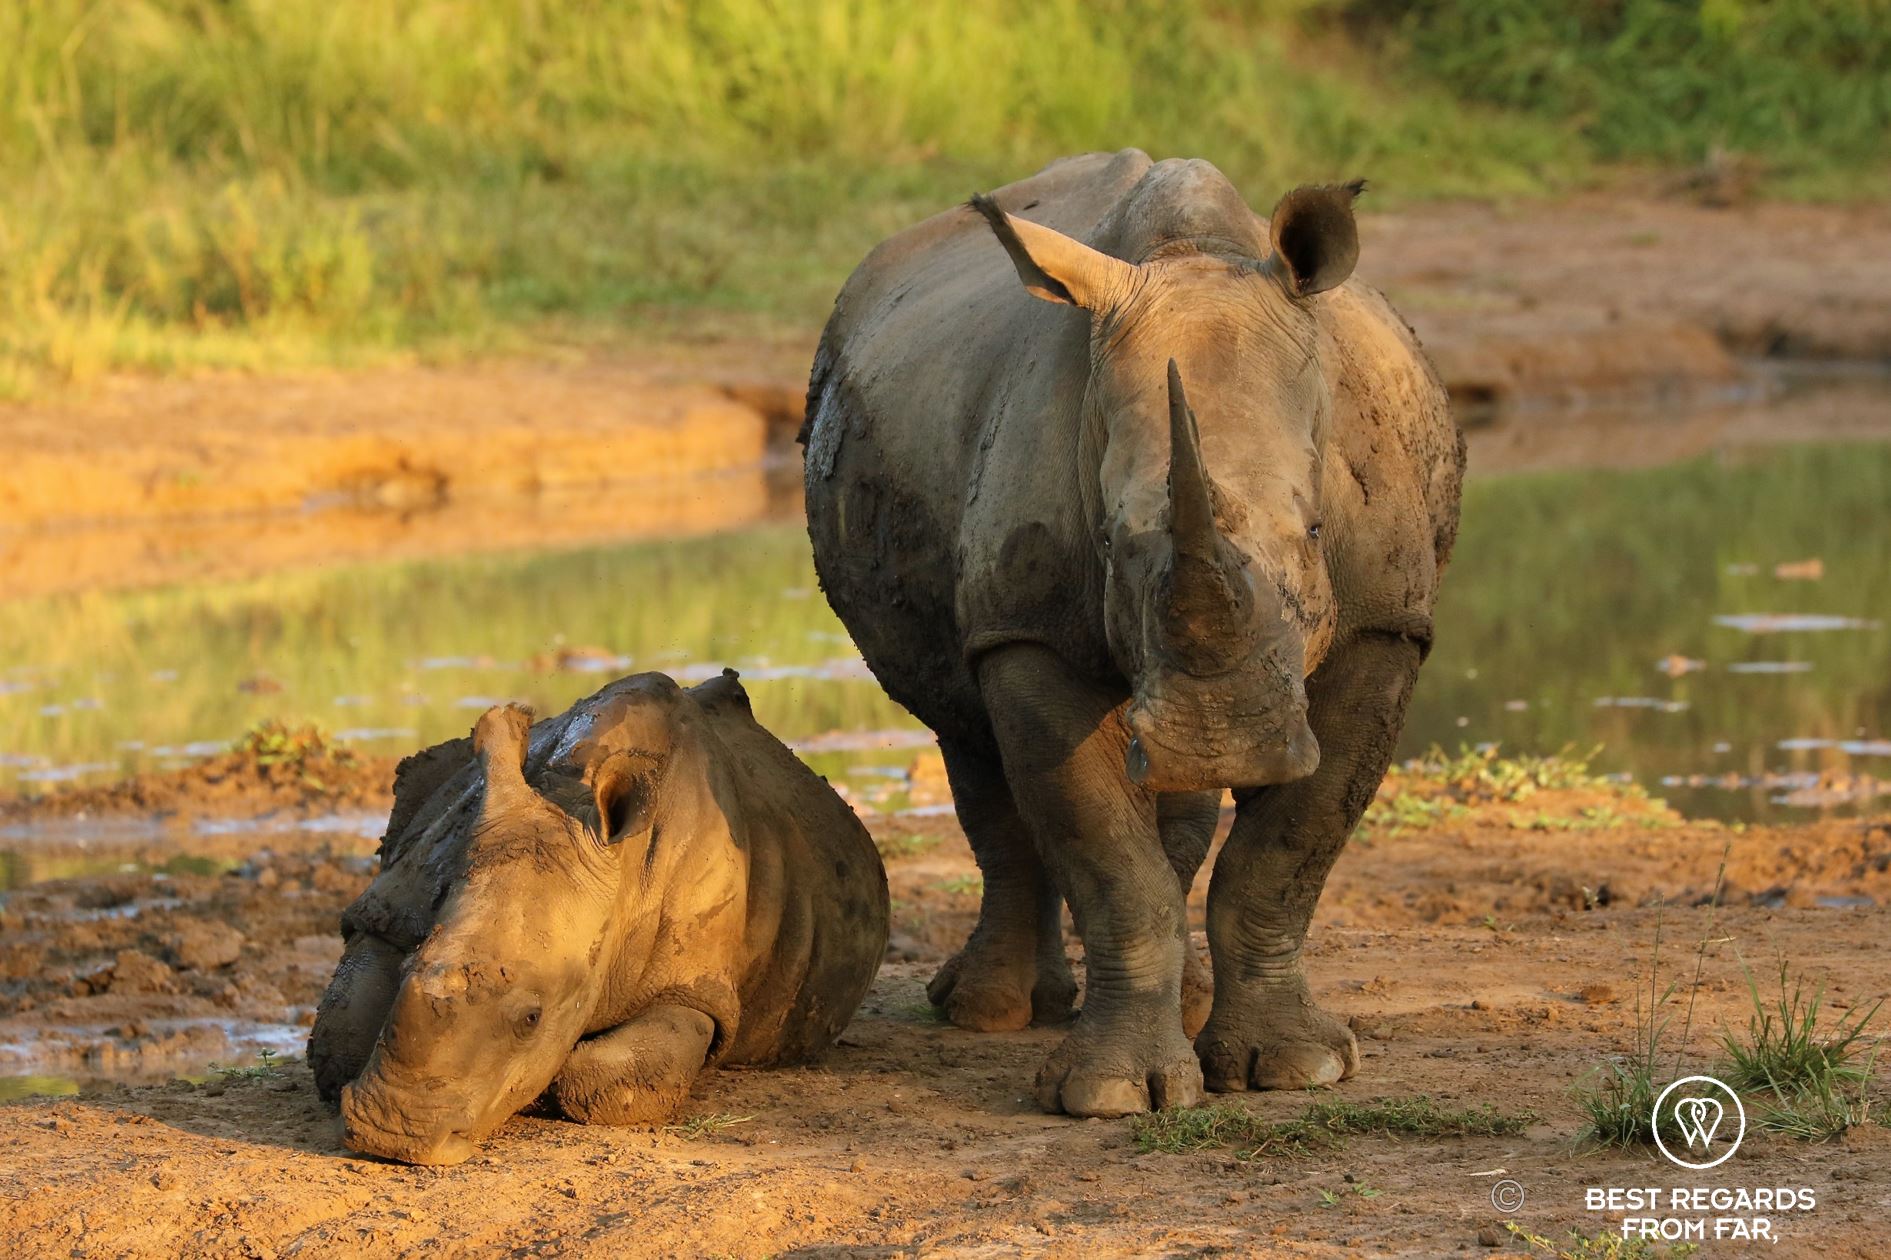 Mother rhino with her calf by a waterhole at sunrise, South Africa.